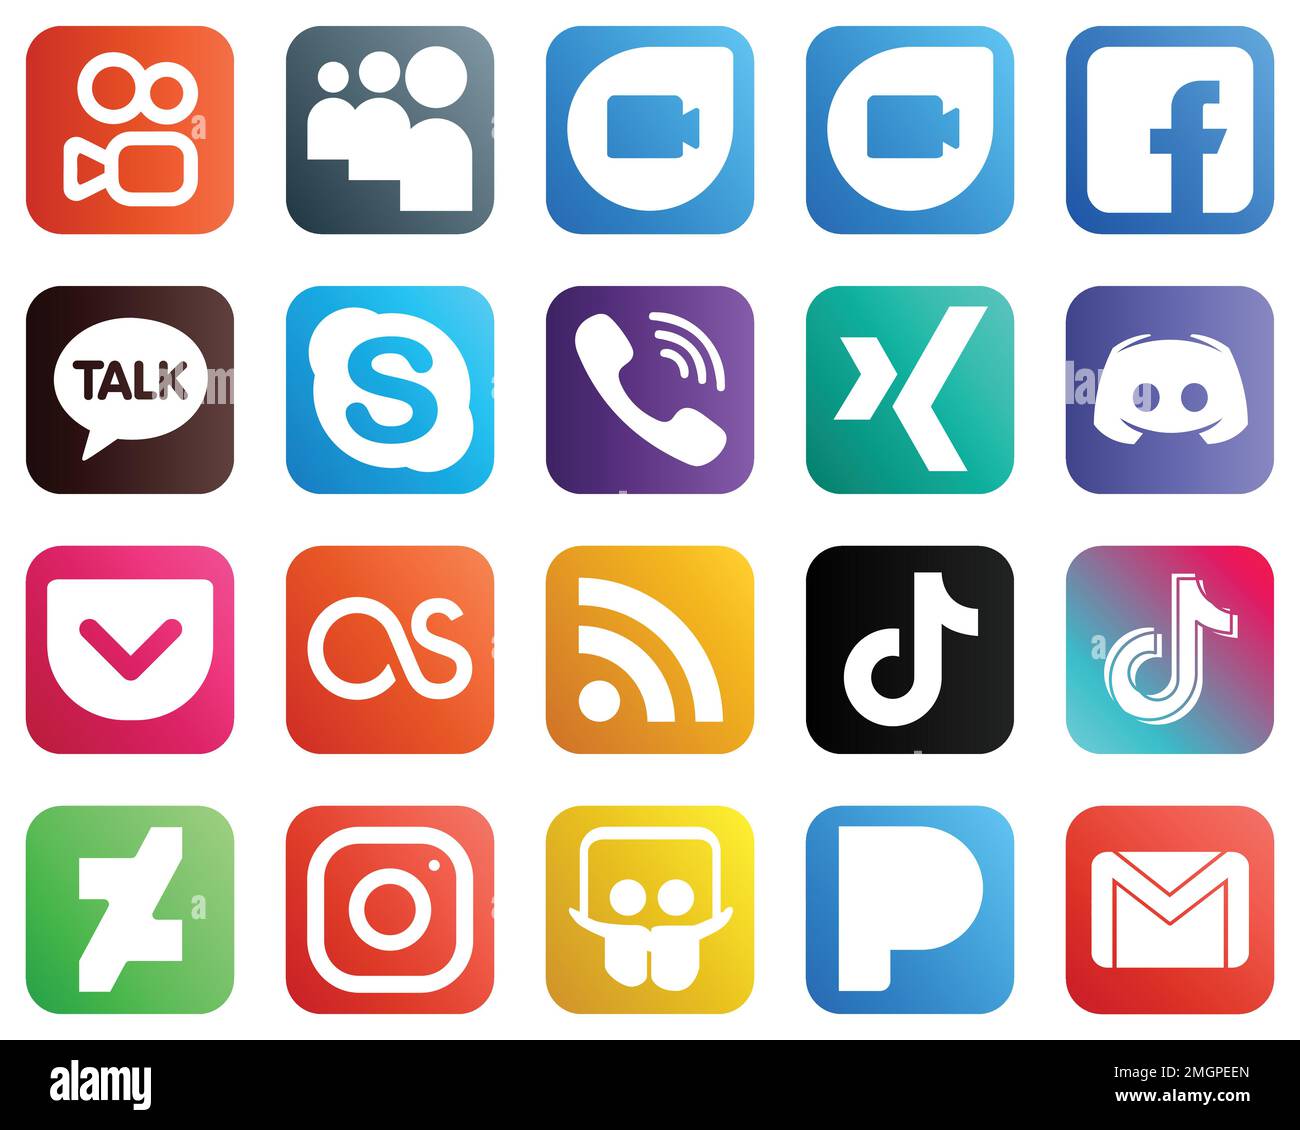 20 Elegant Social Media Icons such as pocket. text. chat. message and xing  icons. Fully customizable and high quality Stock Vector Image & Art - Alamy